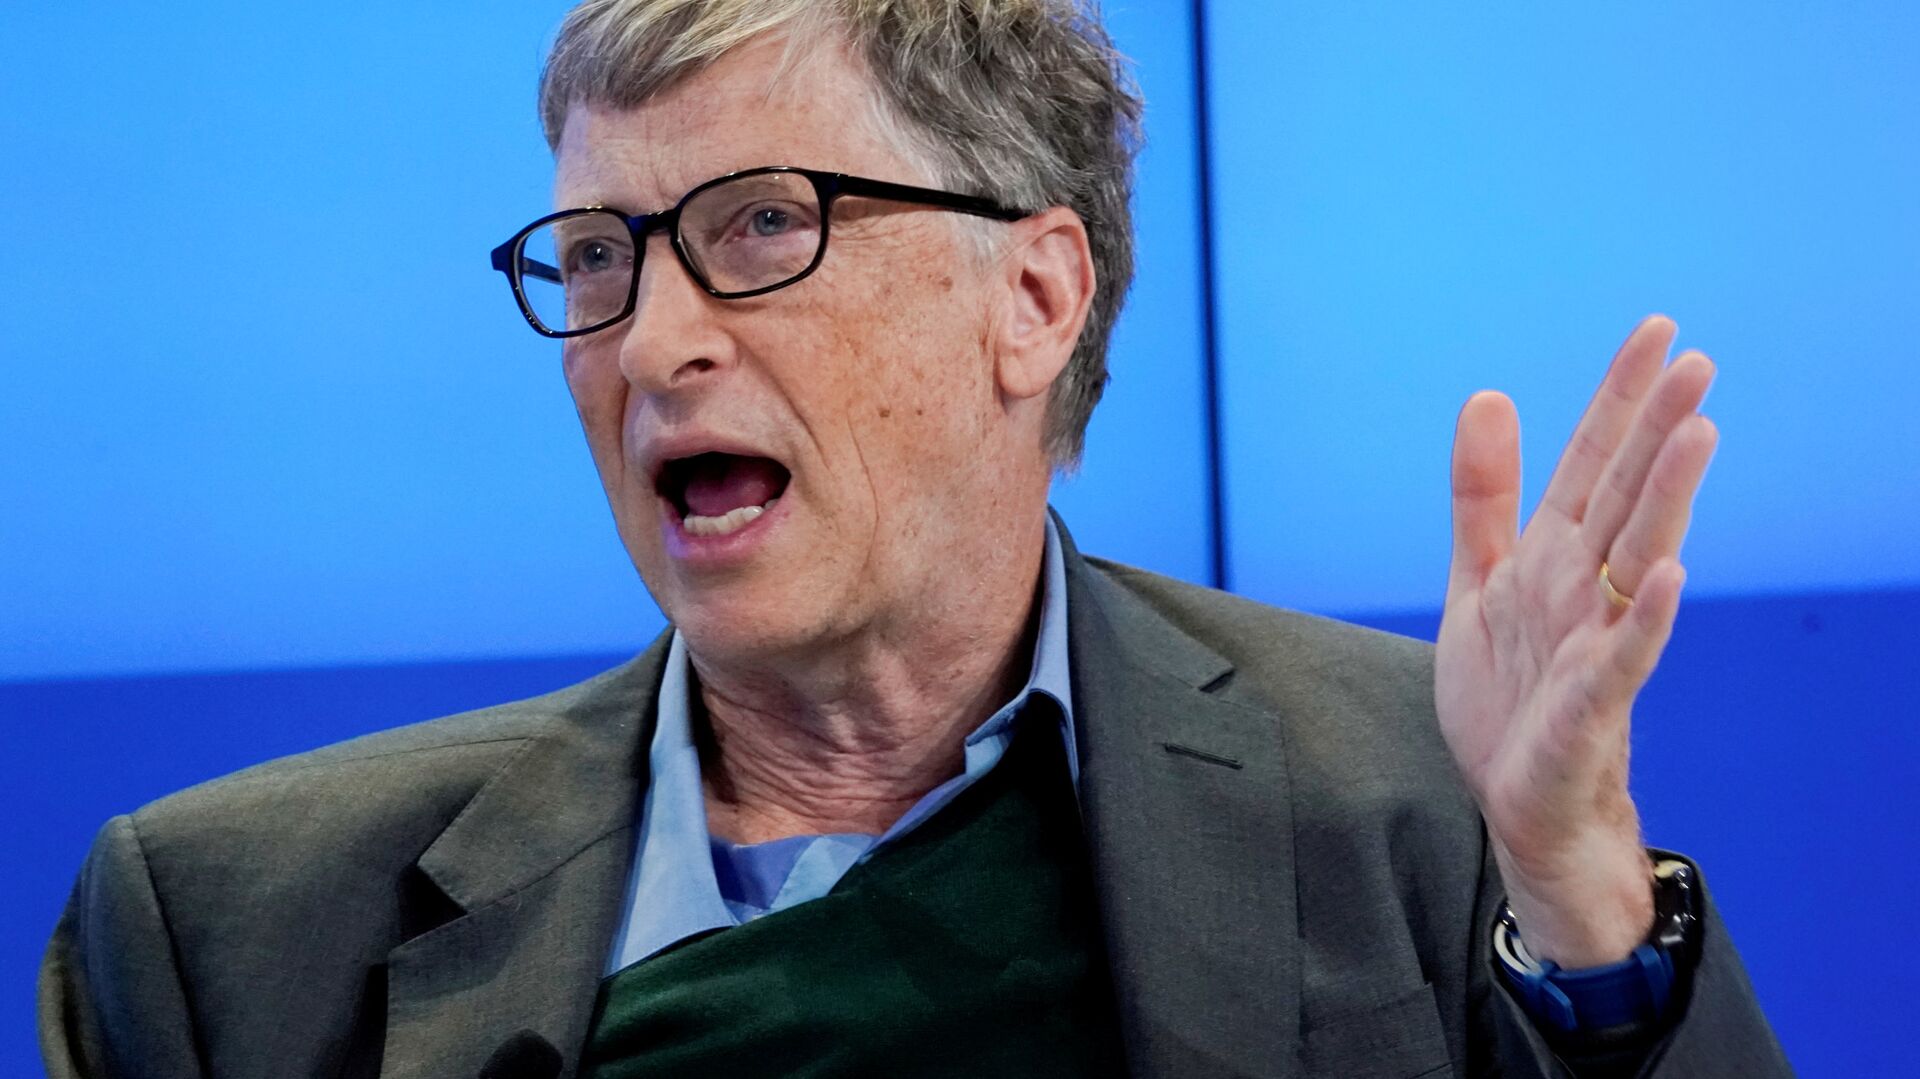  Bill Gates, Co-Chair of Bill & Melinda Gates Foundation, gestures as he speaks during the World Economic Forum (WEF) annual meeting in Davos, Switzerland January 25, 2018 - Sputnik International, 1920, 04.11.2021